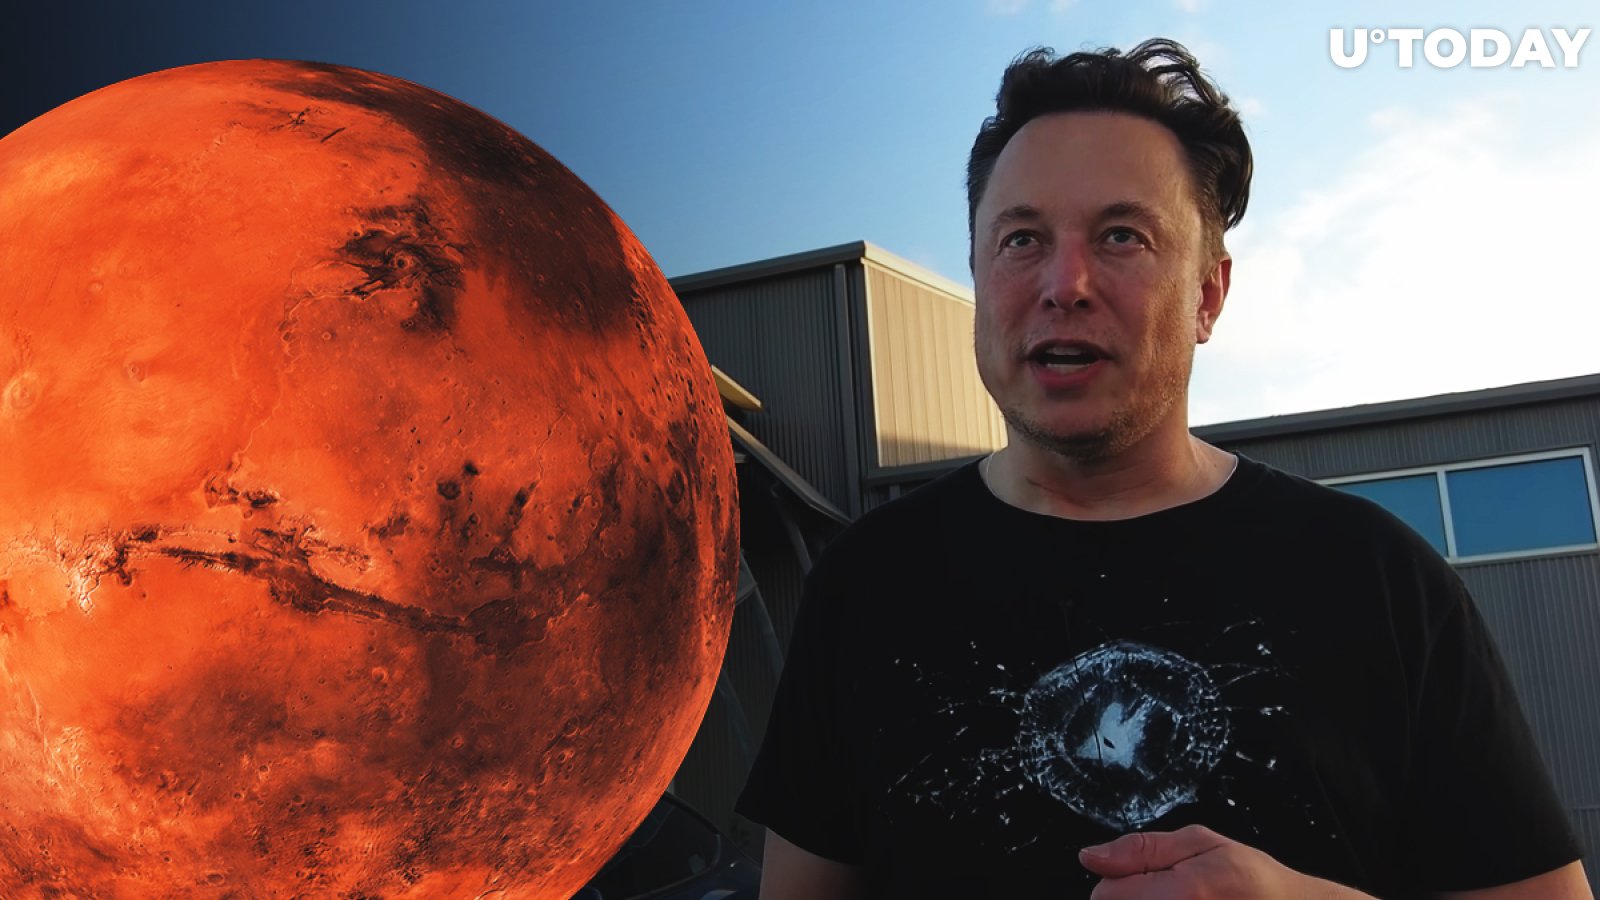 Elon Musk Now Worth 861 Billion DOGE, He Plans to Use It to Extend Life to Mars